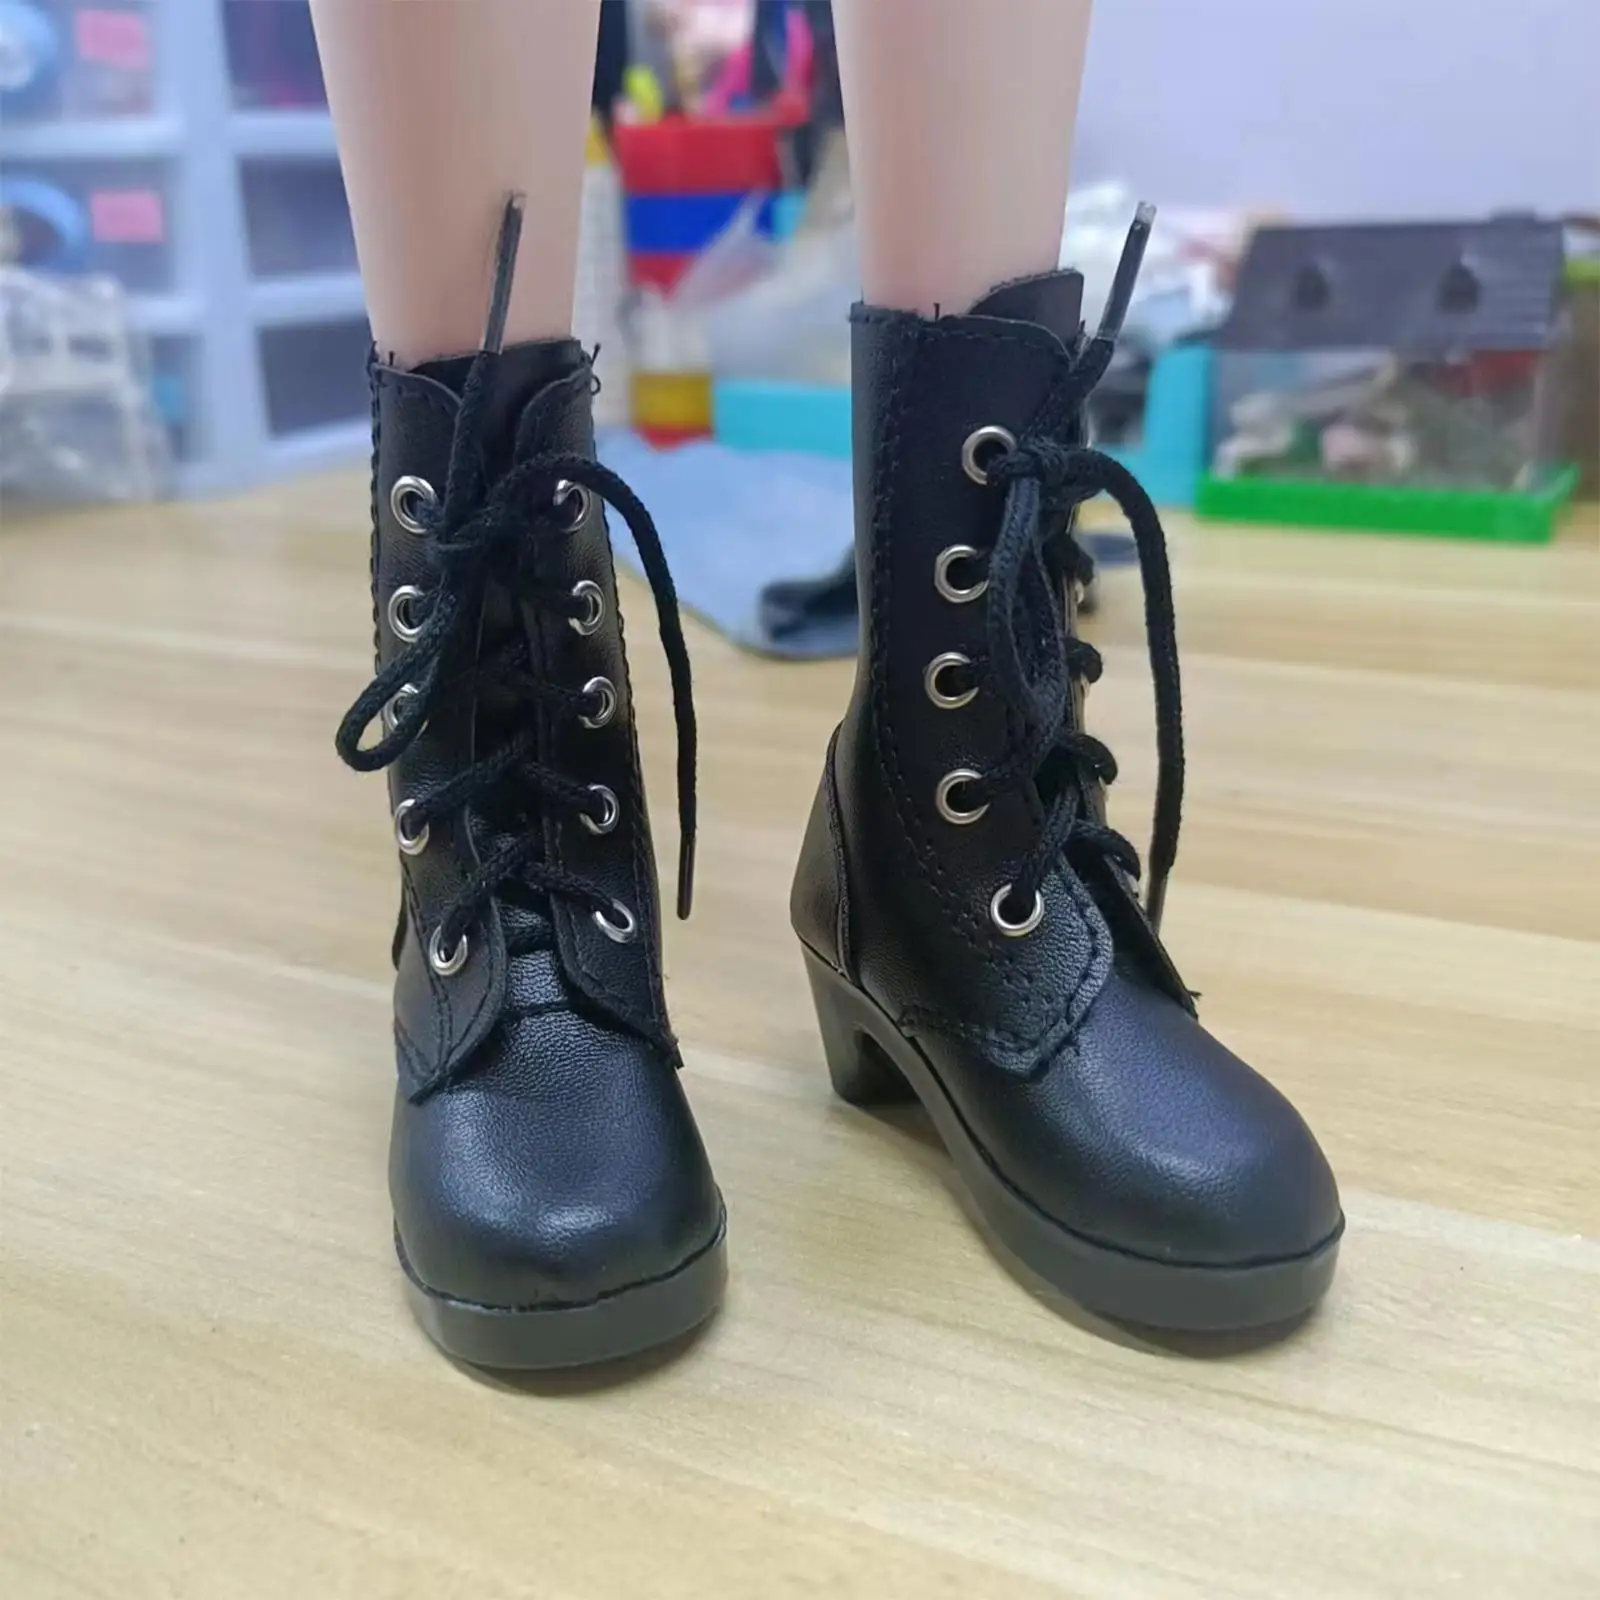 60cm PU Doll Shoes Fashion Women Shoes Outfits Handmade Ball Jointed Dolls Shoes Girl Doll Shoes for 60cm Doll Accessories